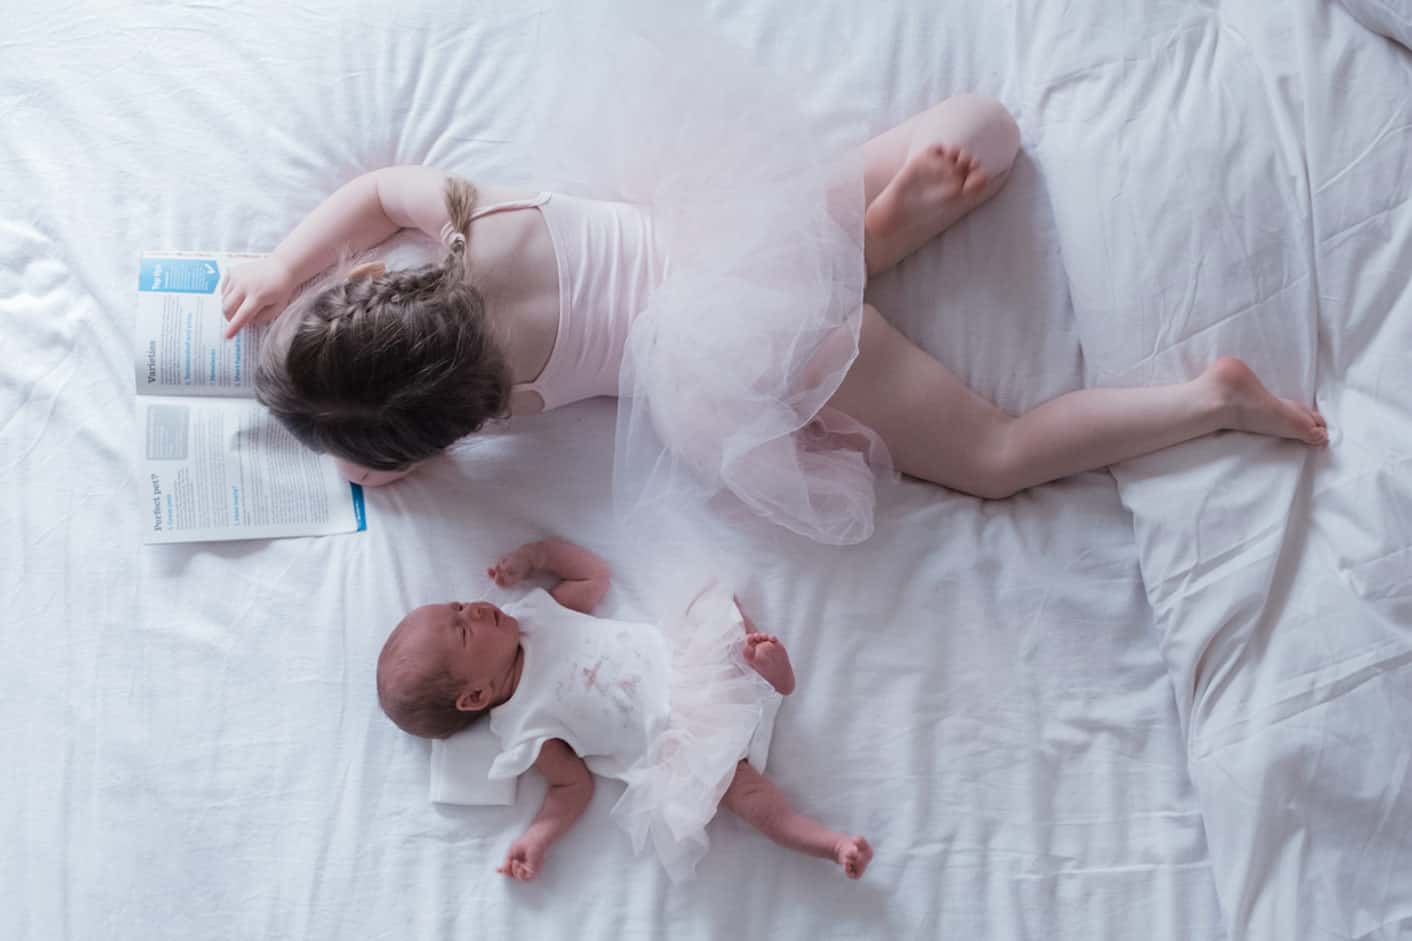 newborn photos taken at home. newborn and her sibling